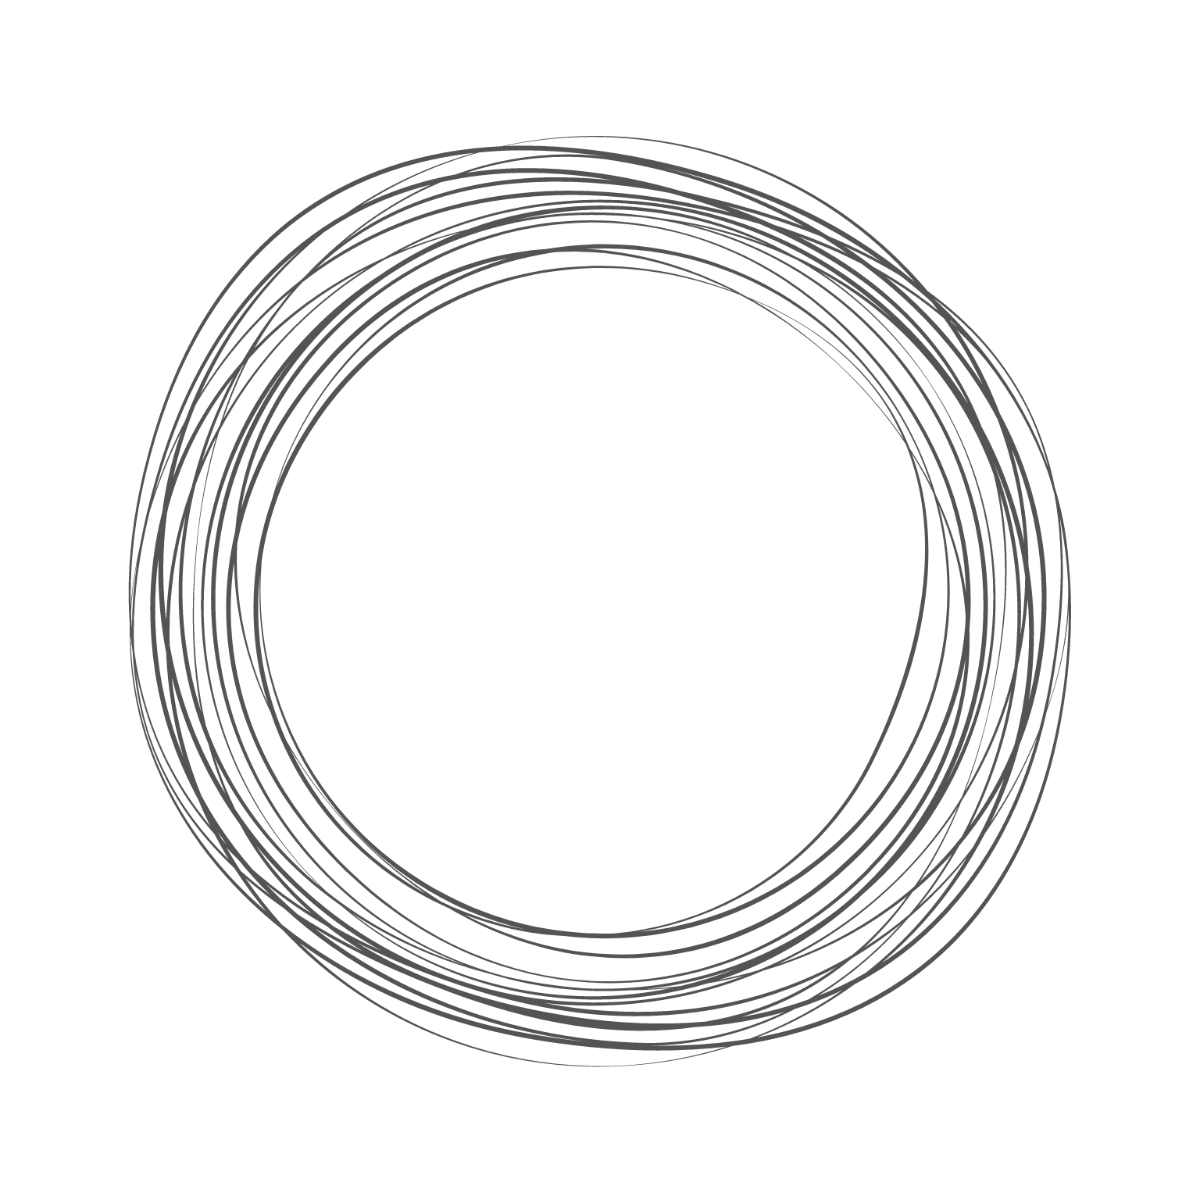 Scribble Circle clipart Template